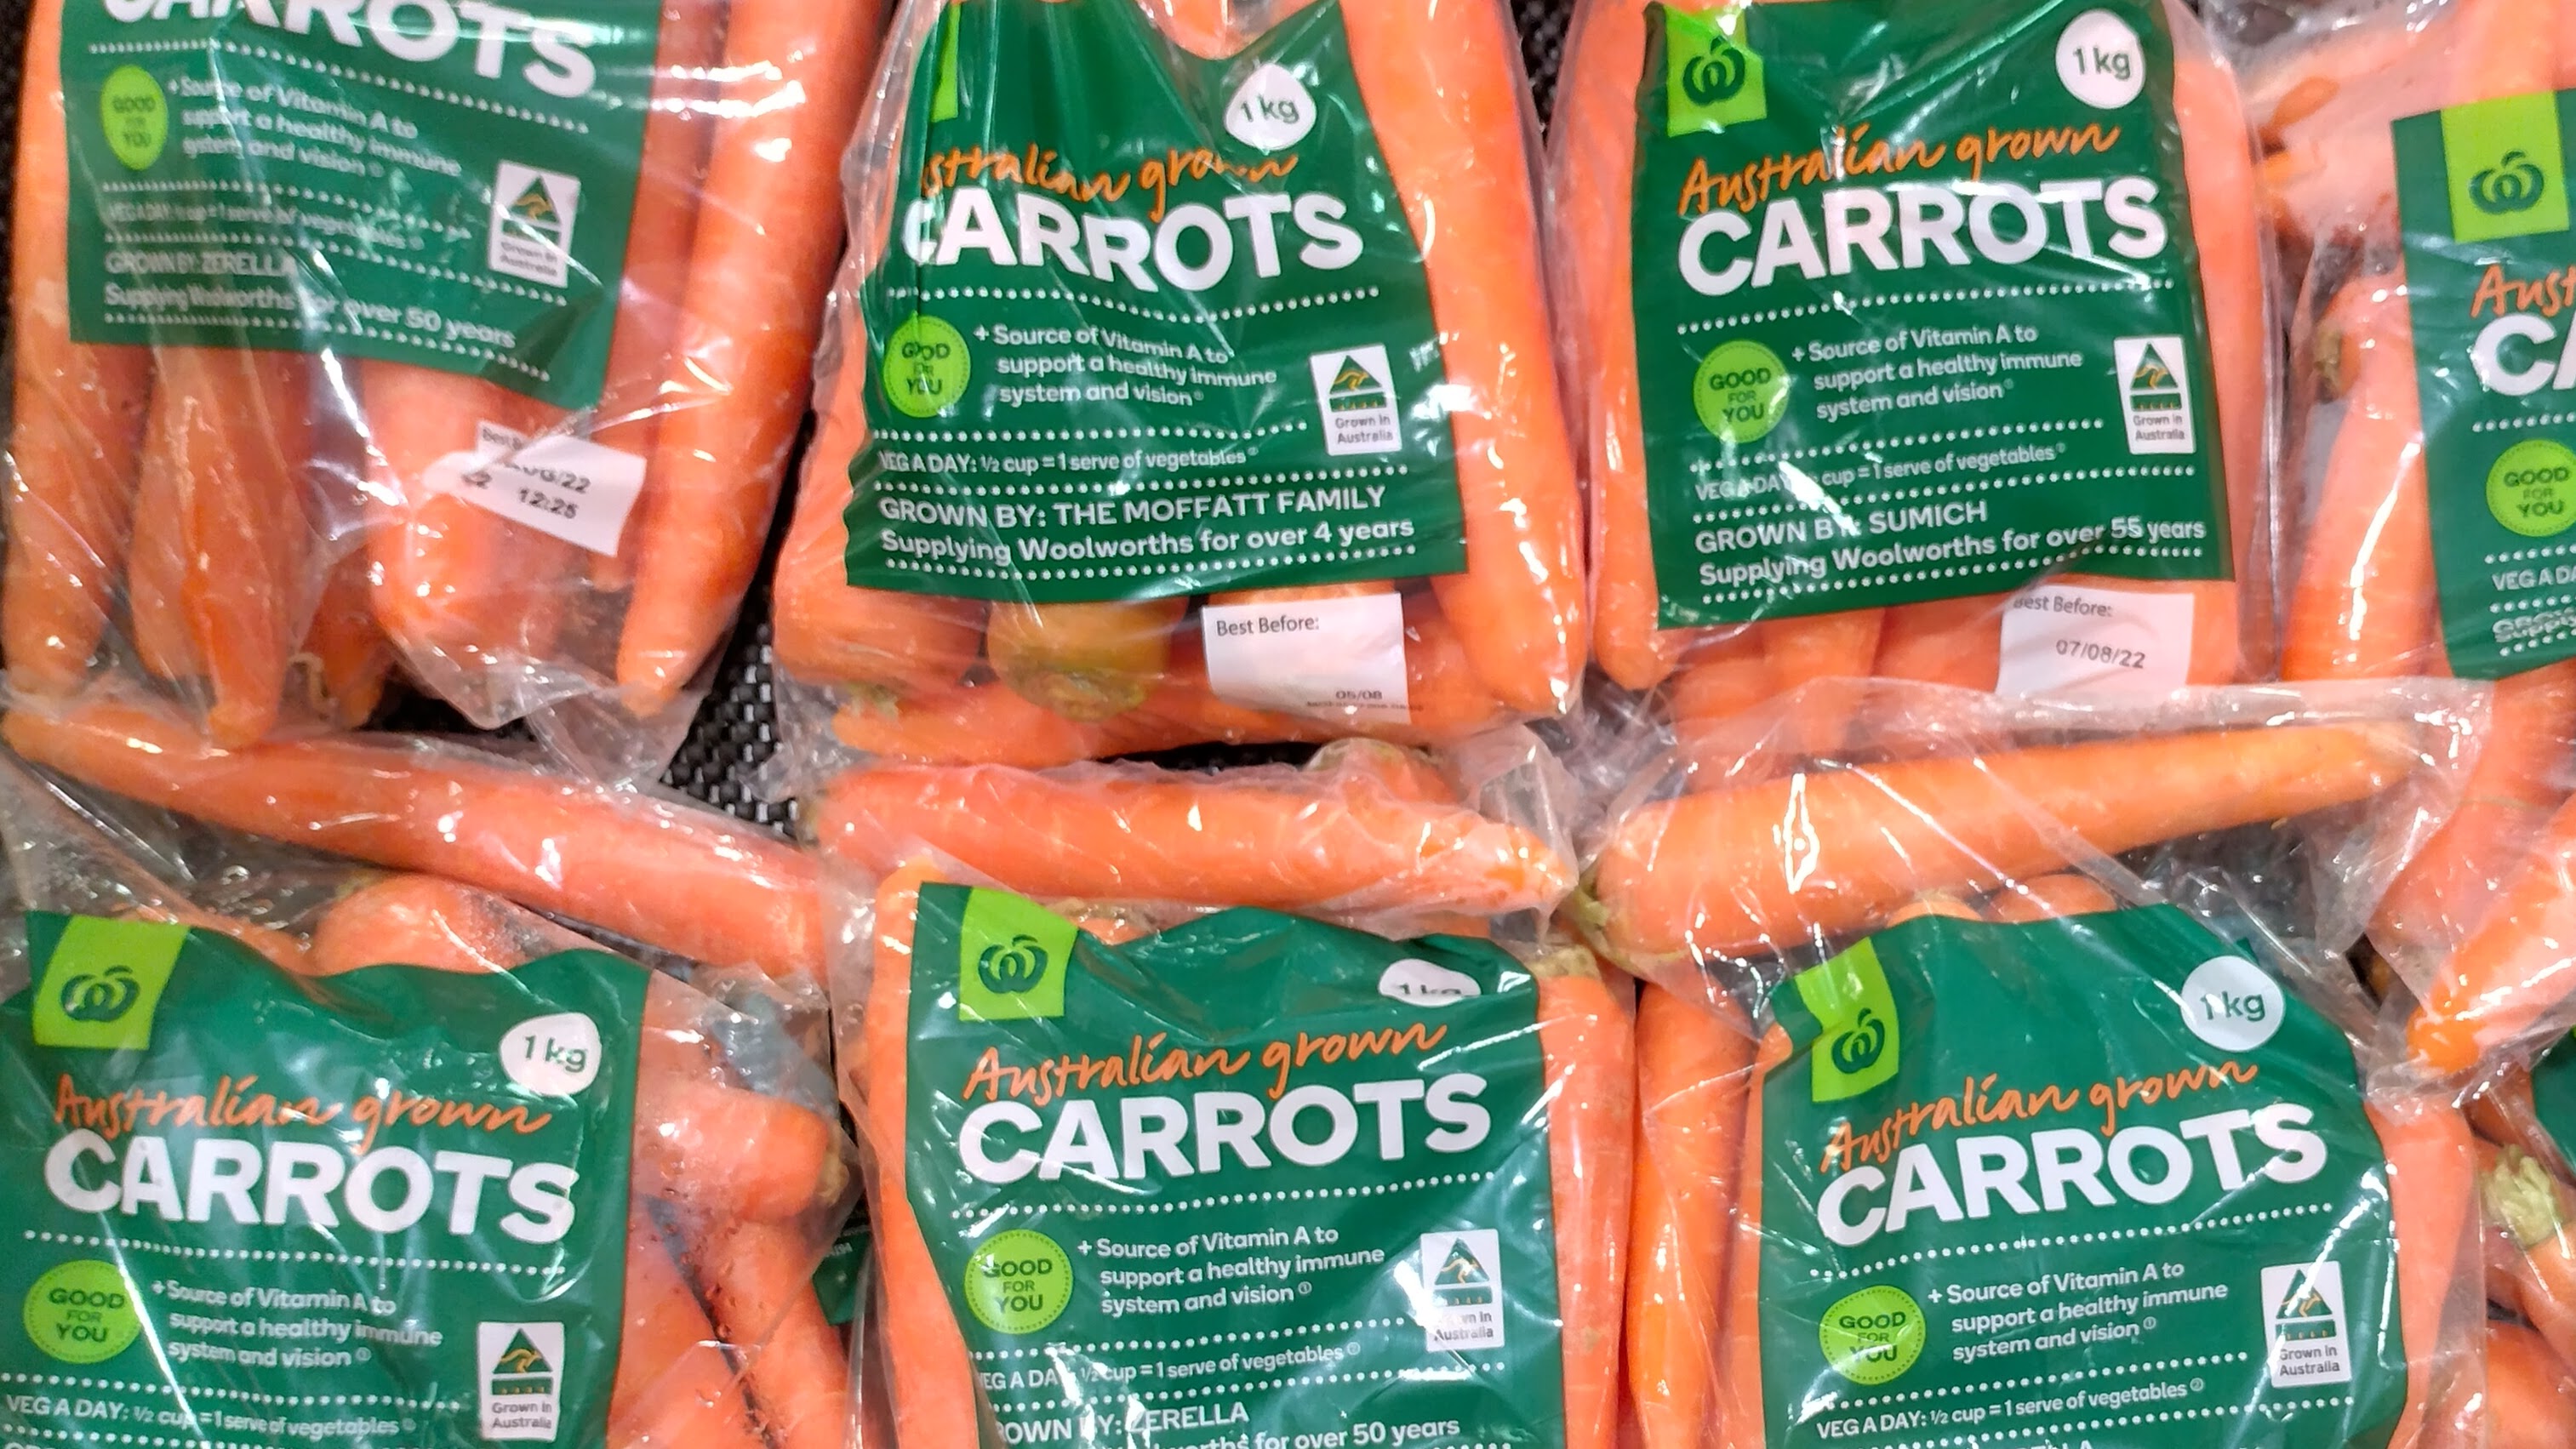 Prepacked carrots on display in a supermarket at World Square